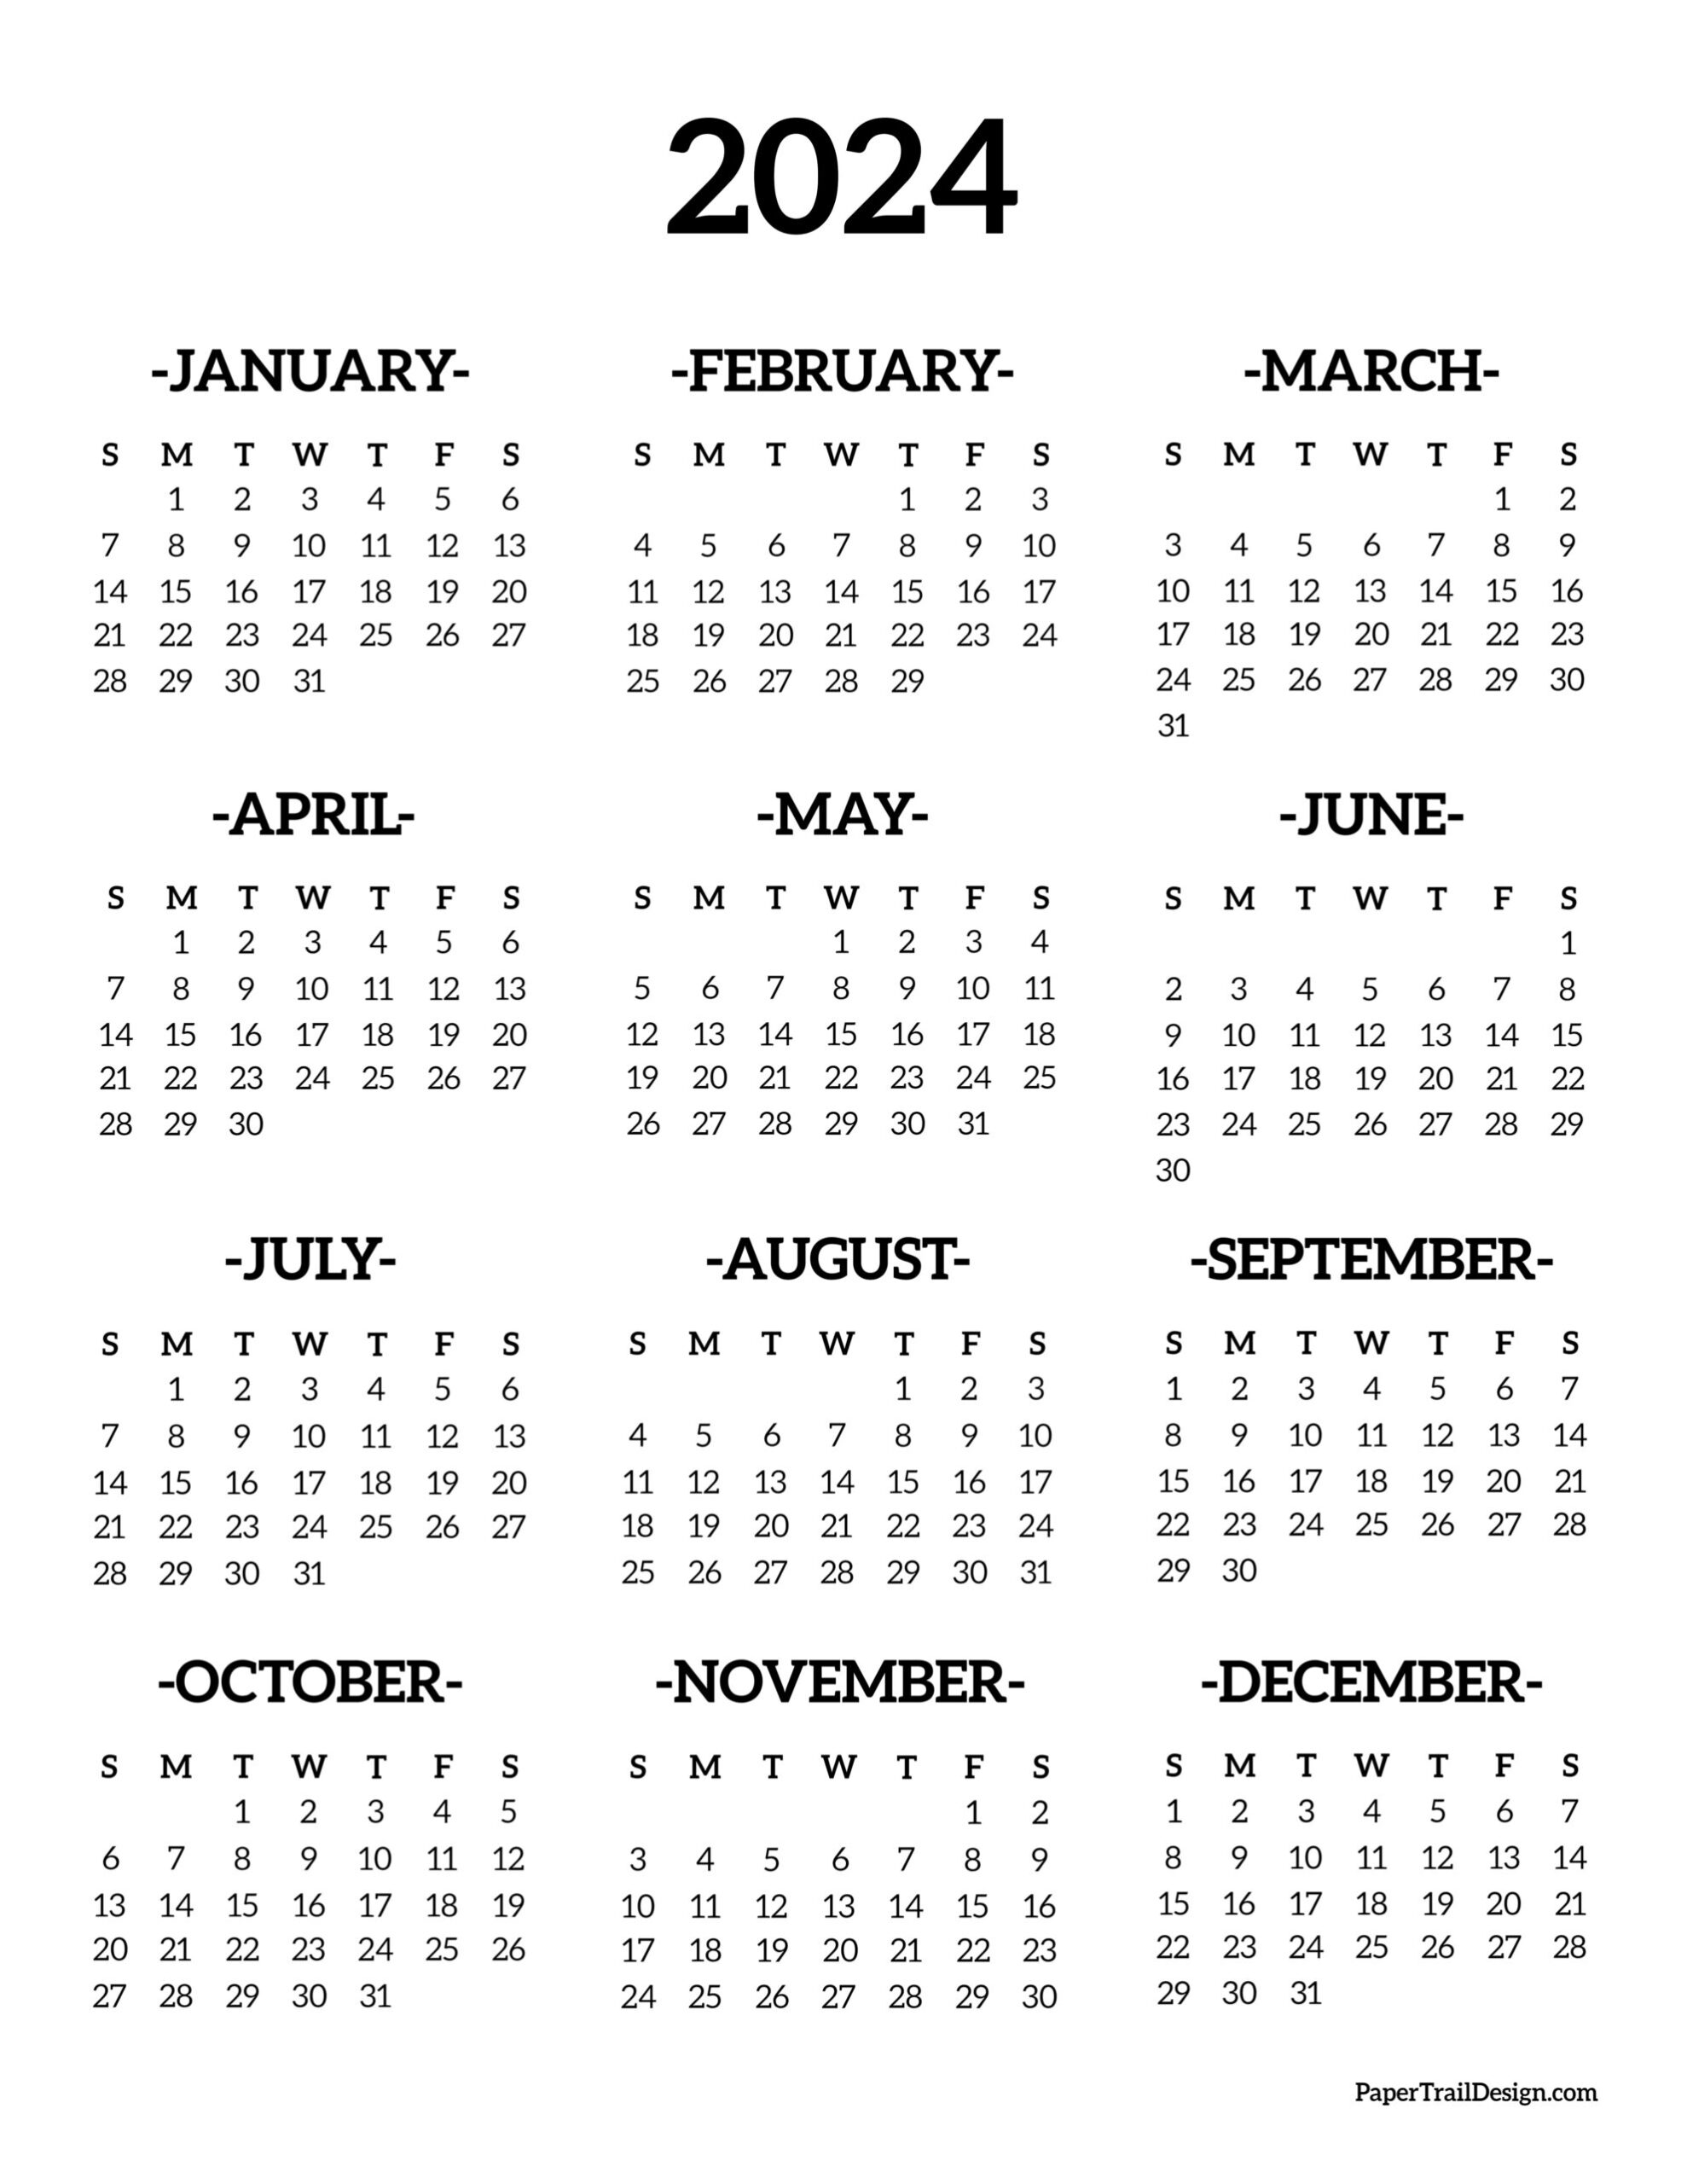 Calendar 2024 Printable One Page - Paper Trail Design for 2024 Yearly Printable Calendar